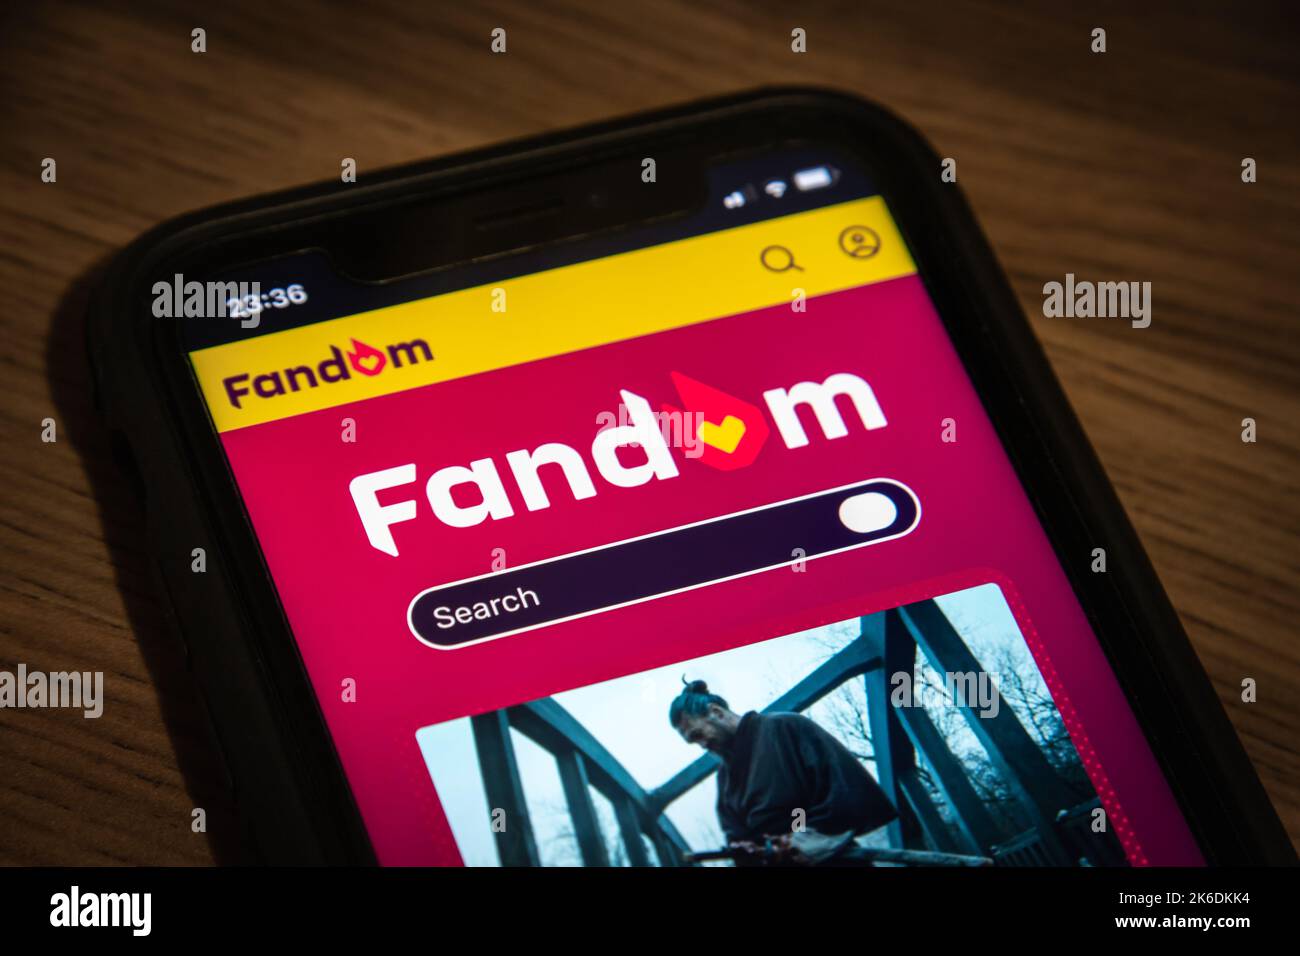 Fandom logo on its website on iPhone. Fandom is wiki hosting service that is specialized in entertainment topics (games, TV, movies, entertainers) Stock Photo